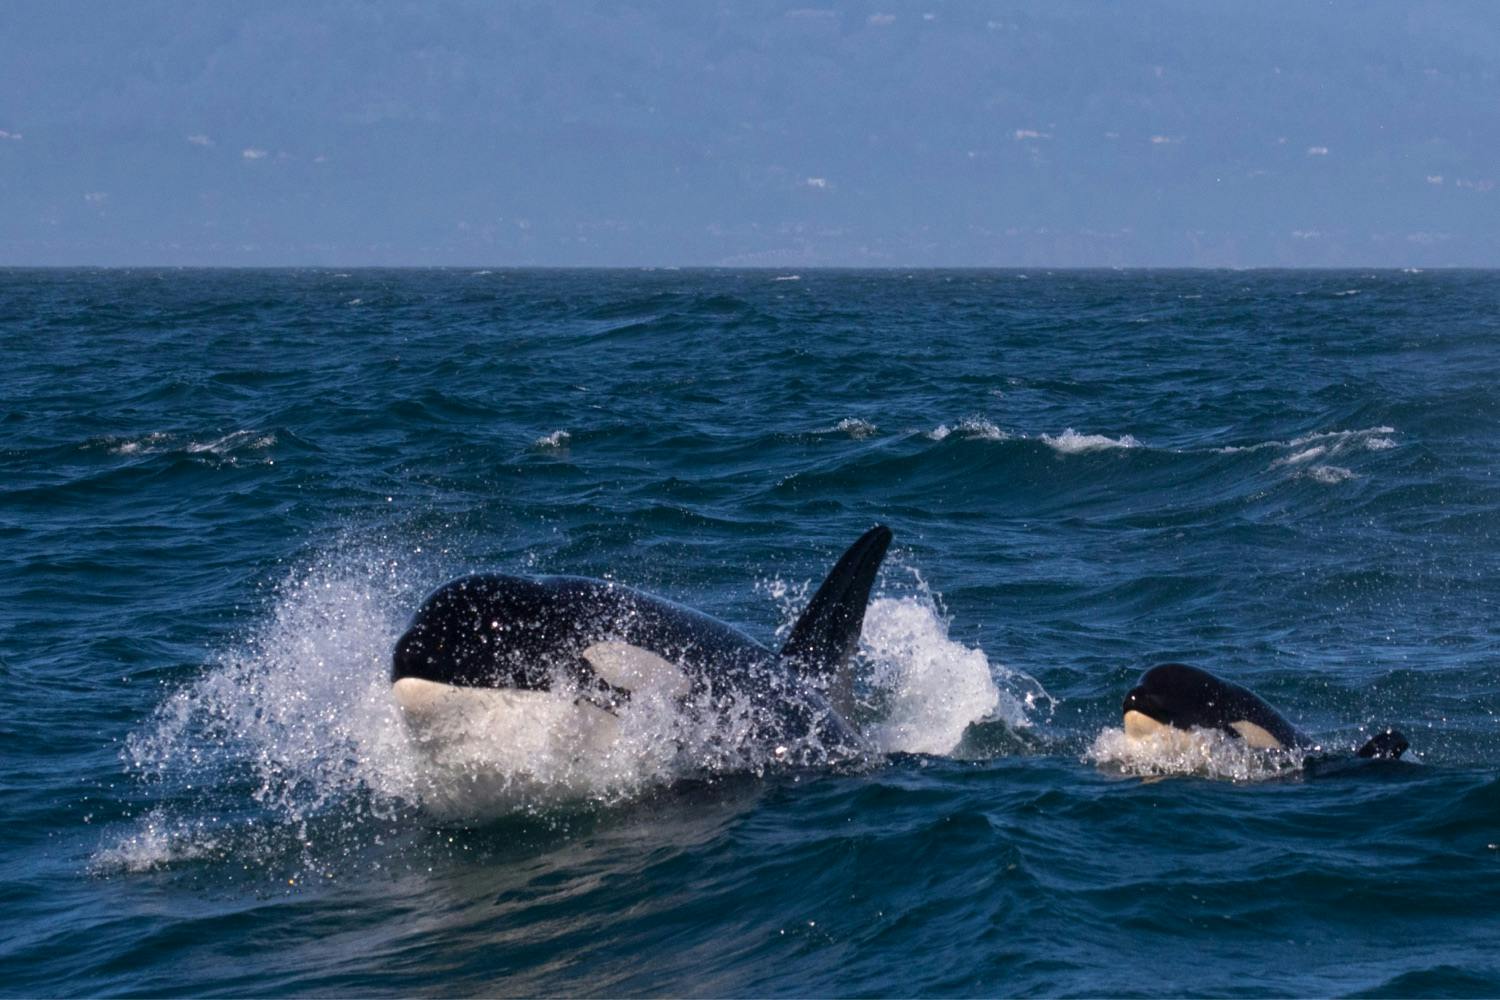 Louise the Orca with her daughter, Little B, photographed by Jodi Frediani